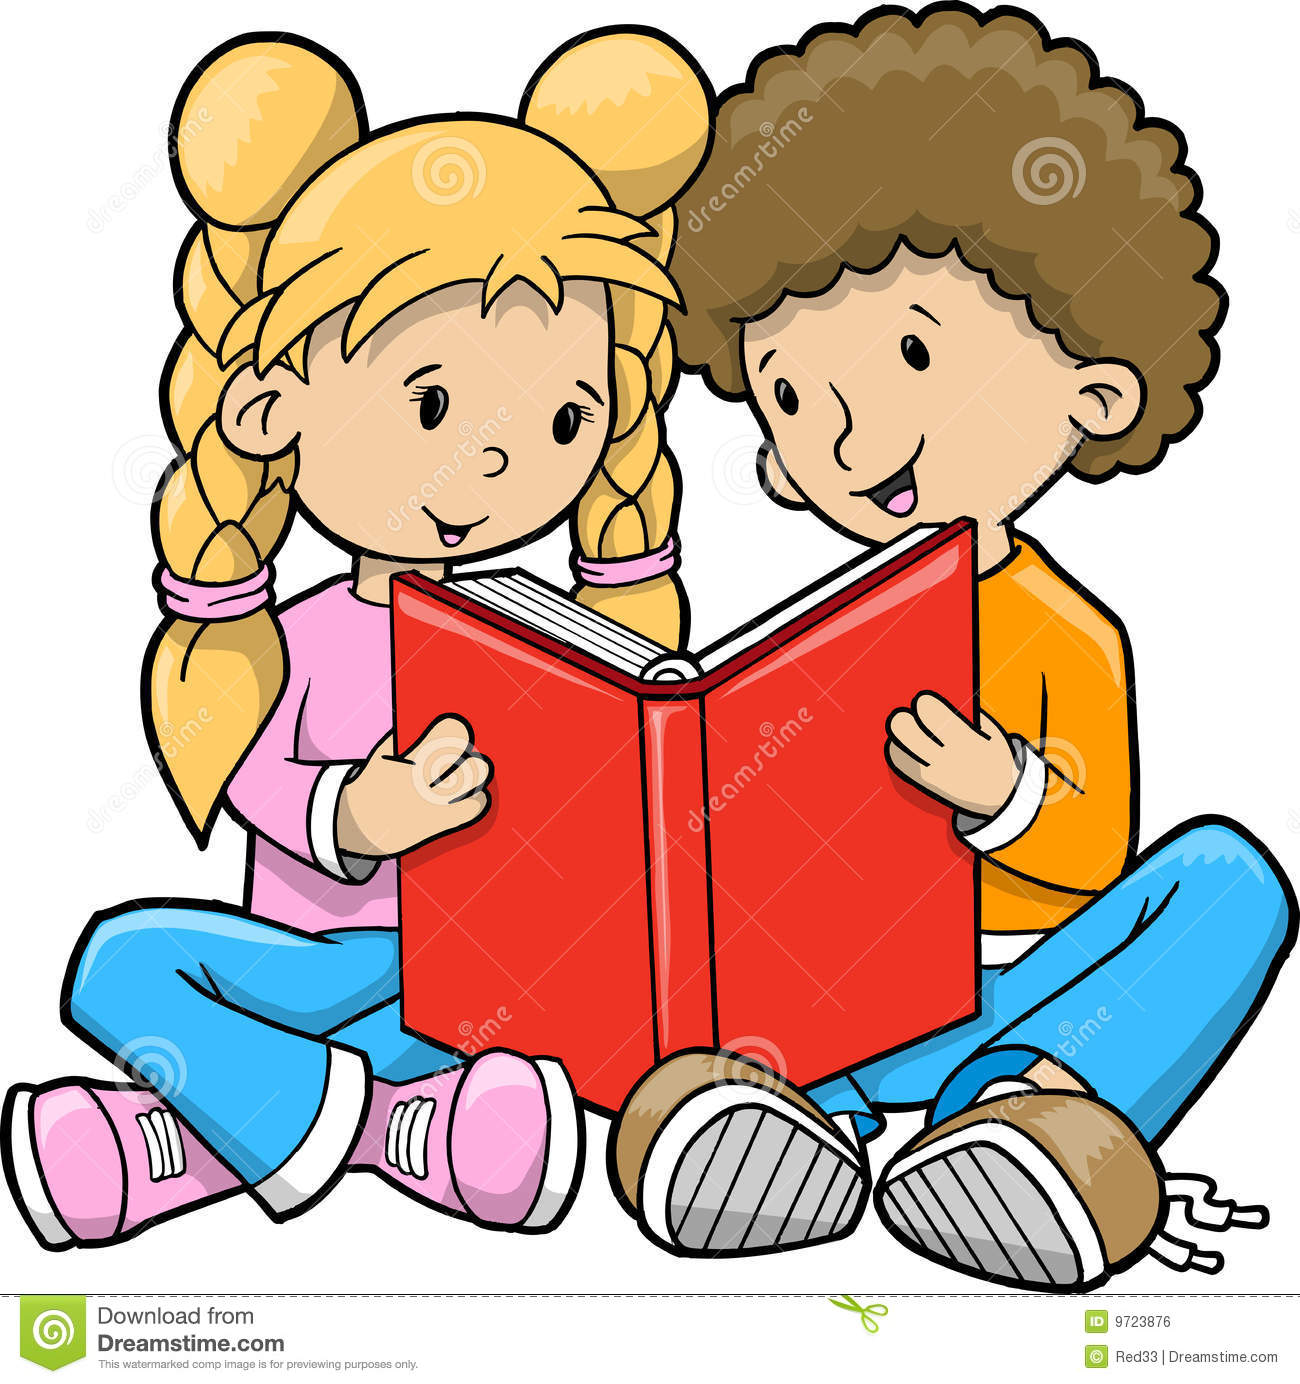 Children Reading Book Vector Royalty Free Stock Image   Image  9723876